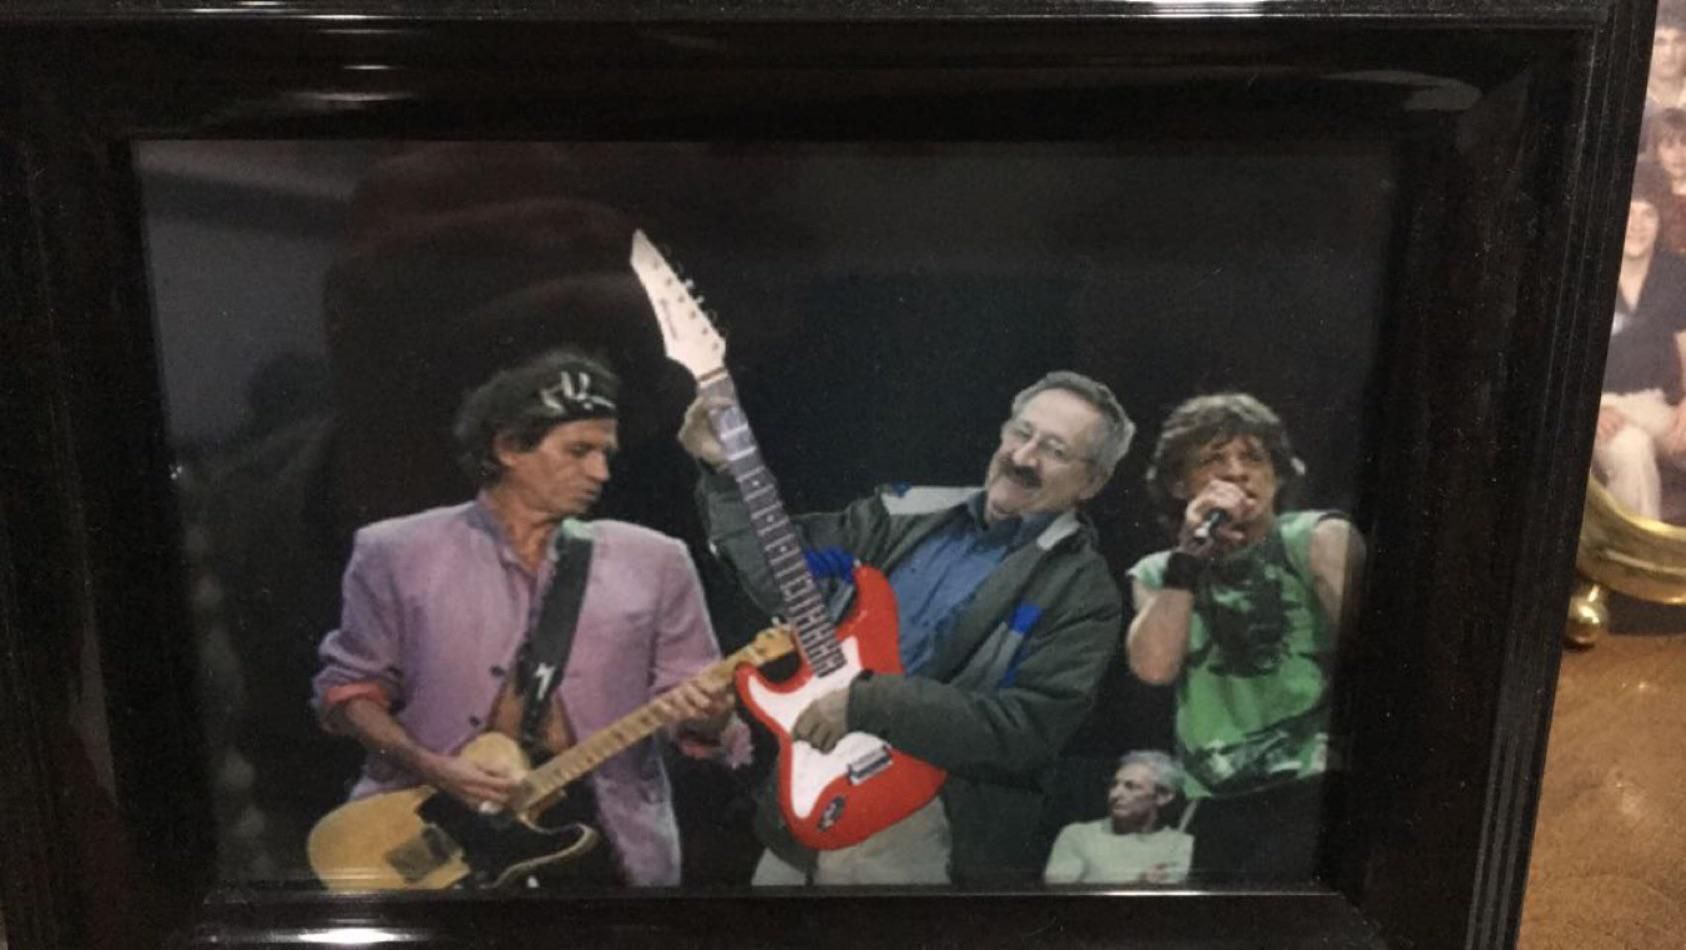 My boyfriends grandfather figured out how to use photoshop and has this framed in his house.